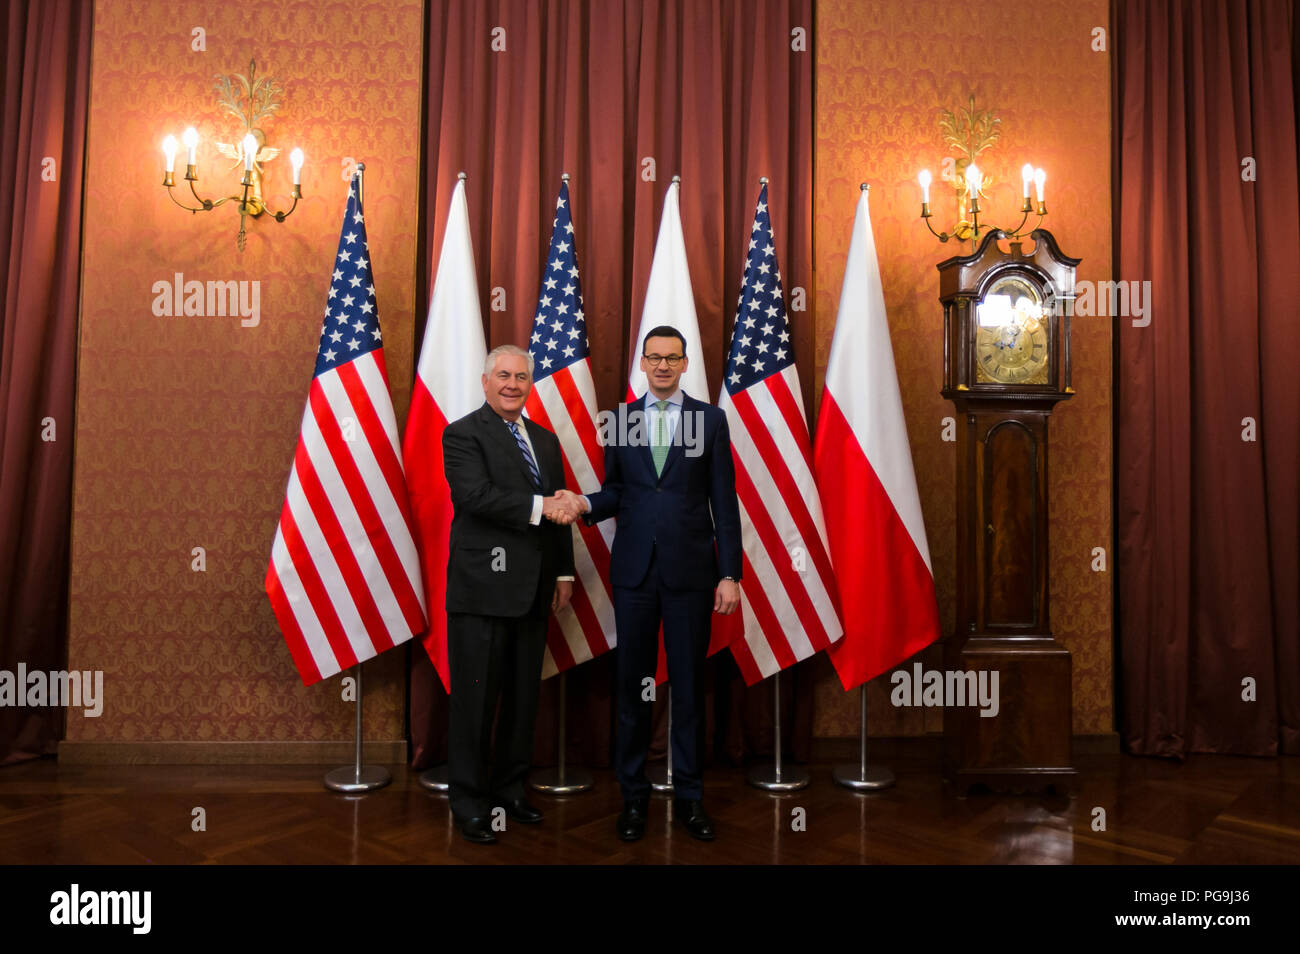 U.S Secretary of State Rex Tillerson and Polish Prime Minister Mateusz Morawiecki shake hands during their meeting in Warsaw, Poland on January 27, 2018. Stock Photo